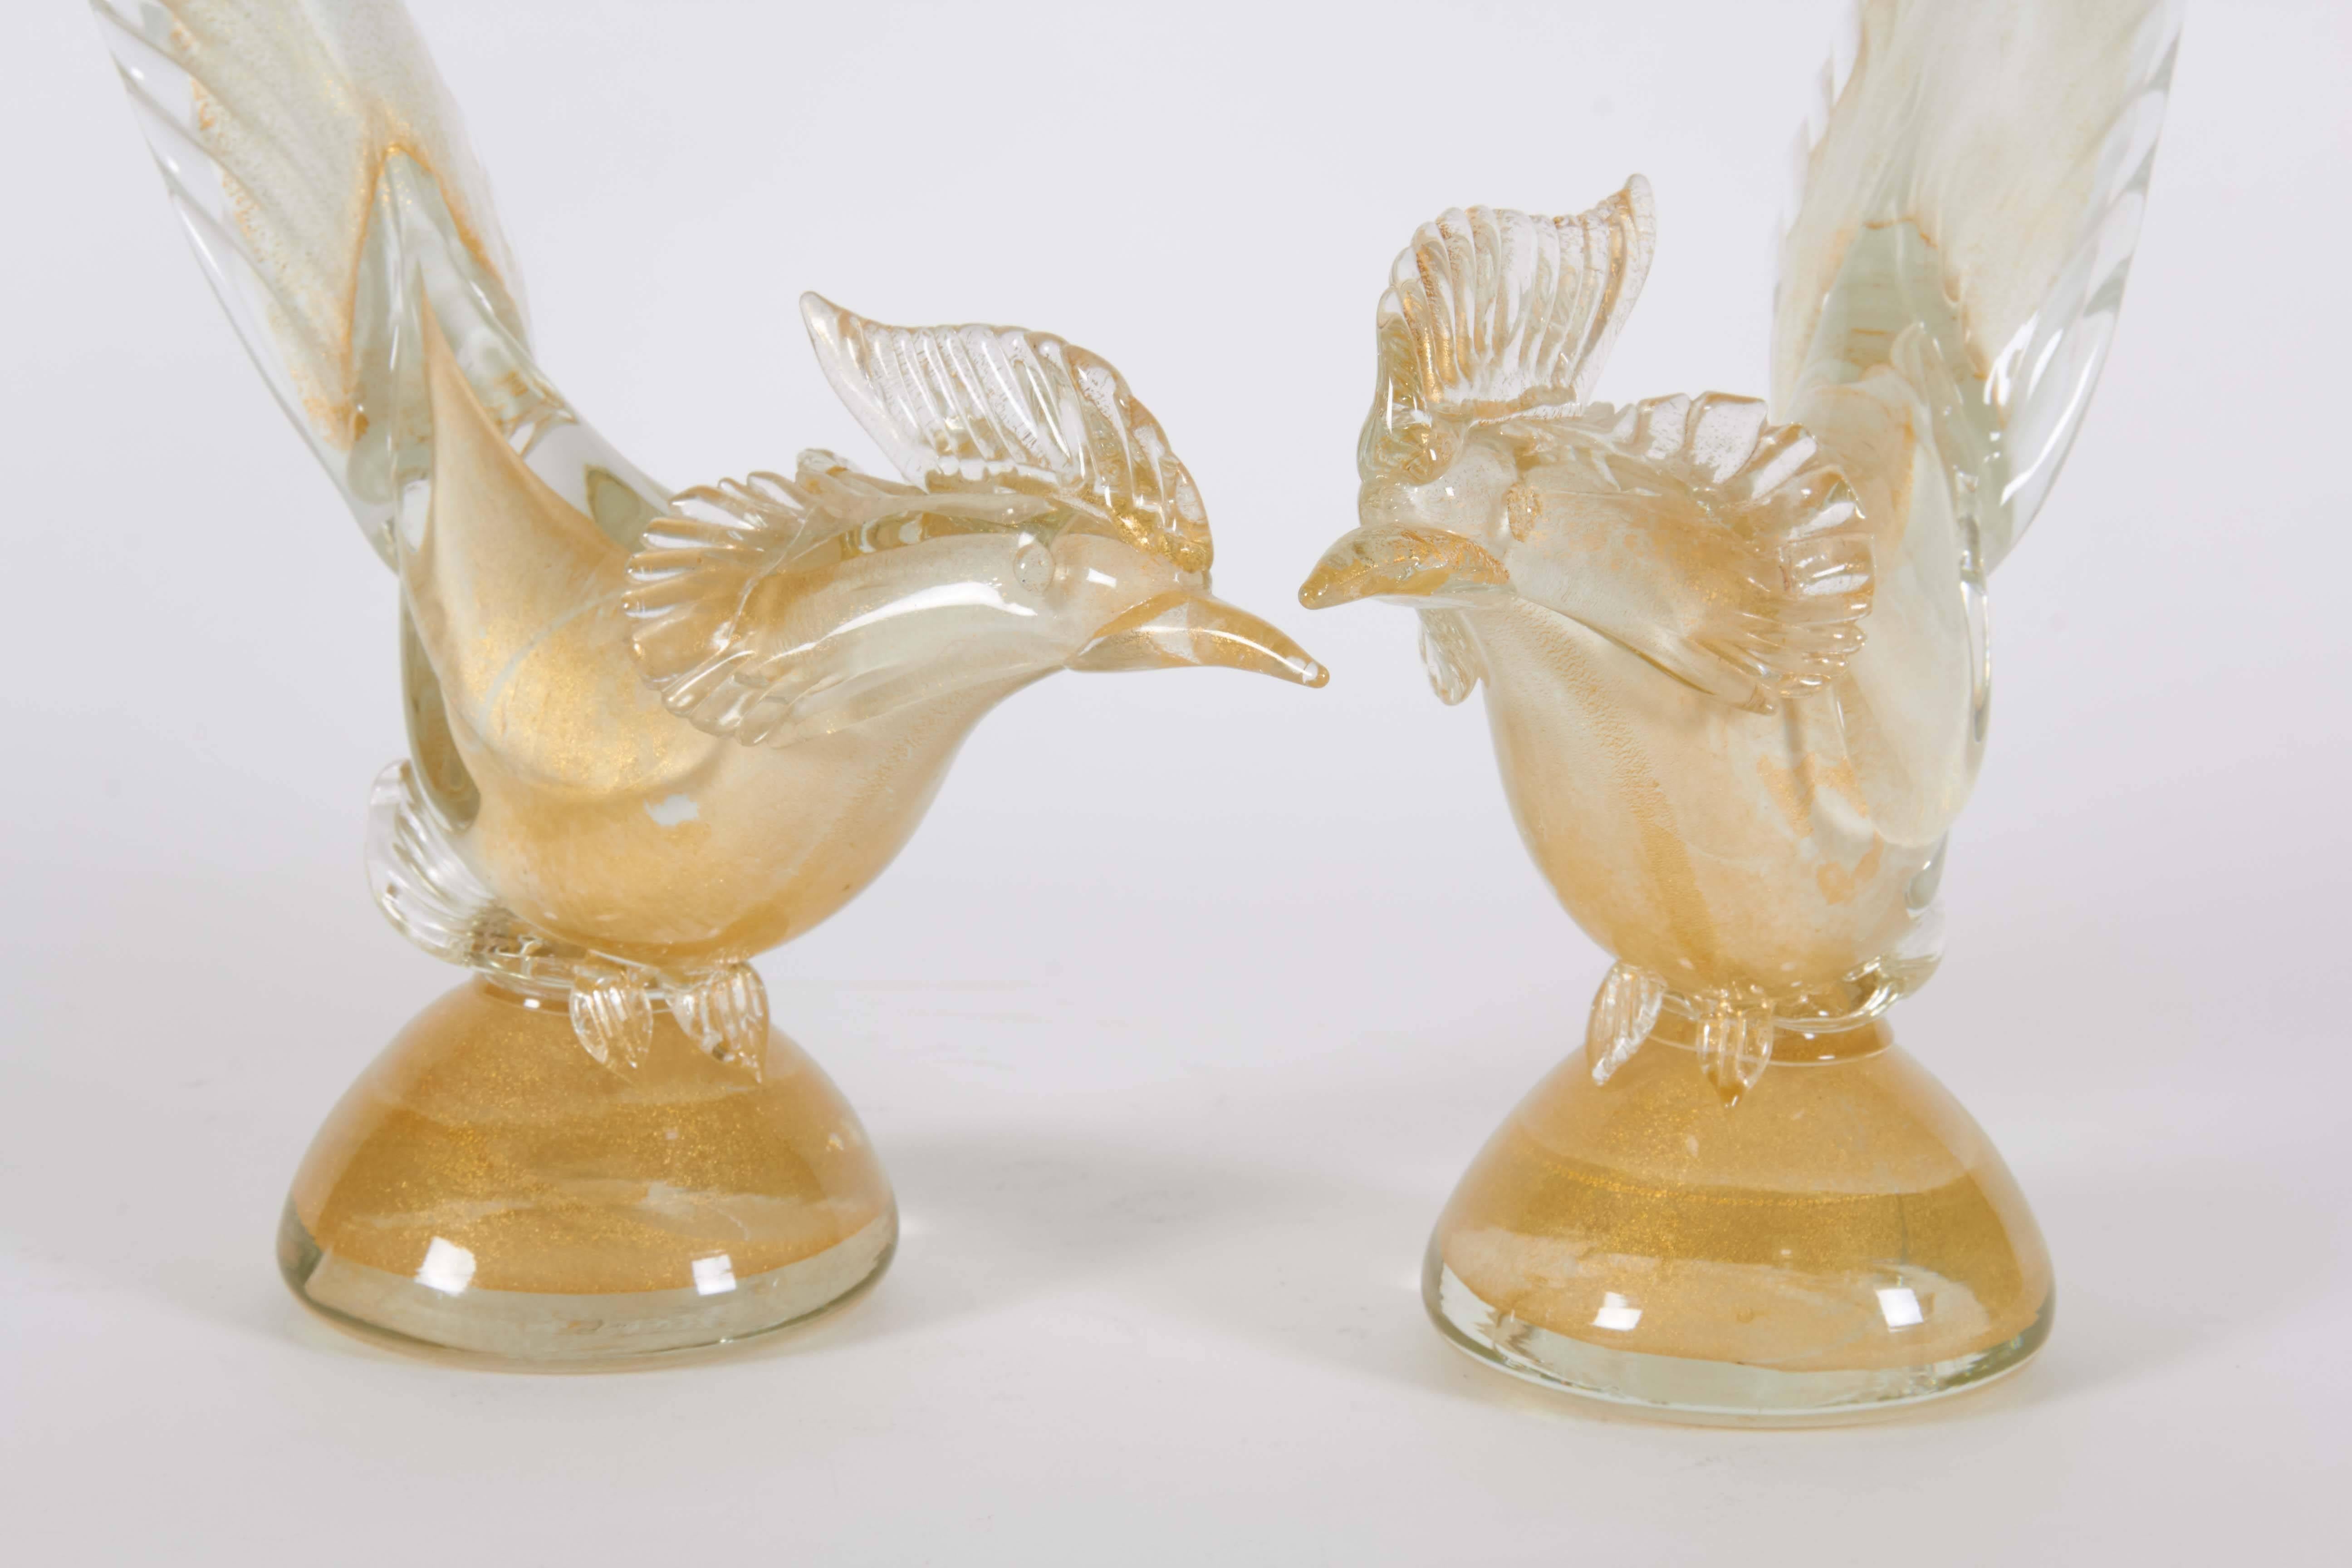 This pair of vintage gold and glass Seguso Murano roosters with their tapering long glass tails are an elegant home decoration. The roosters have beautiful detail showcasing the Murano craftsmanship.